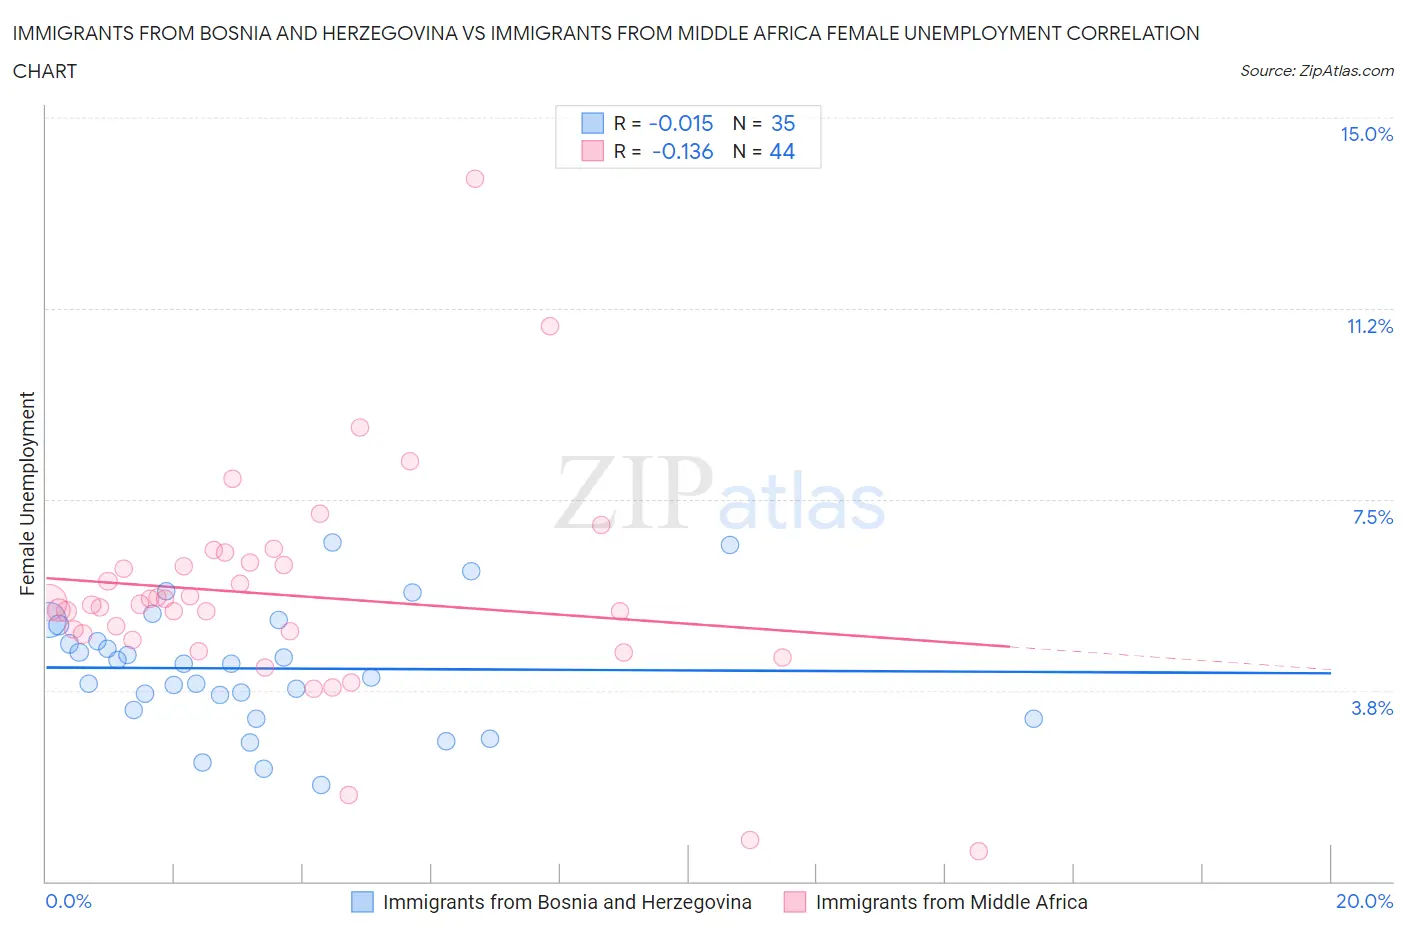 Immigrants from Bosnia and Herzegovina vs Immigrants from Middle Africa Female Unemployment